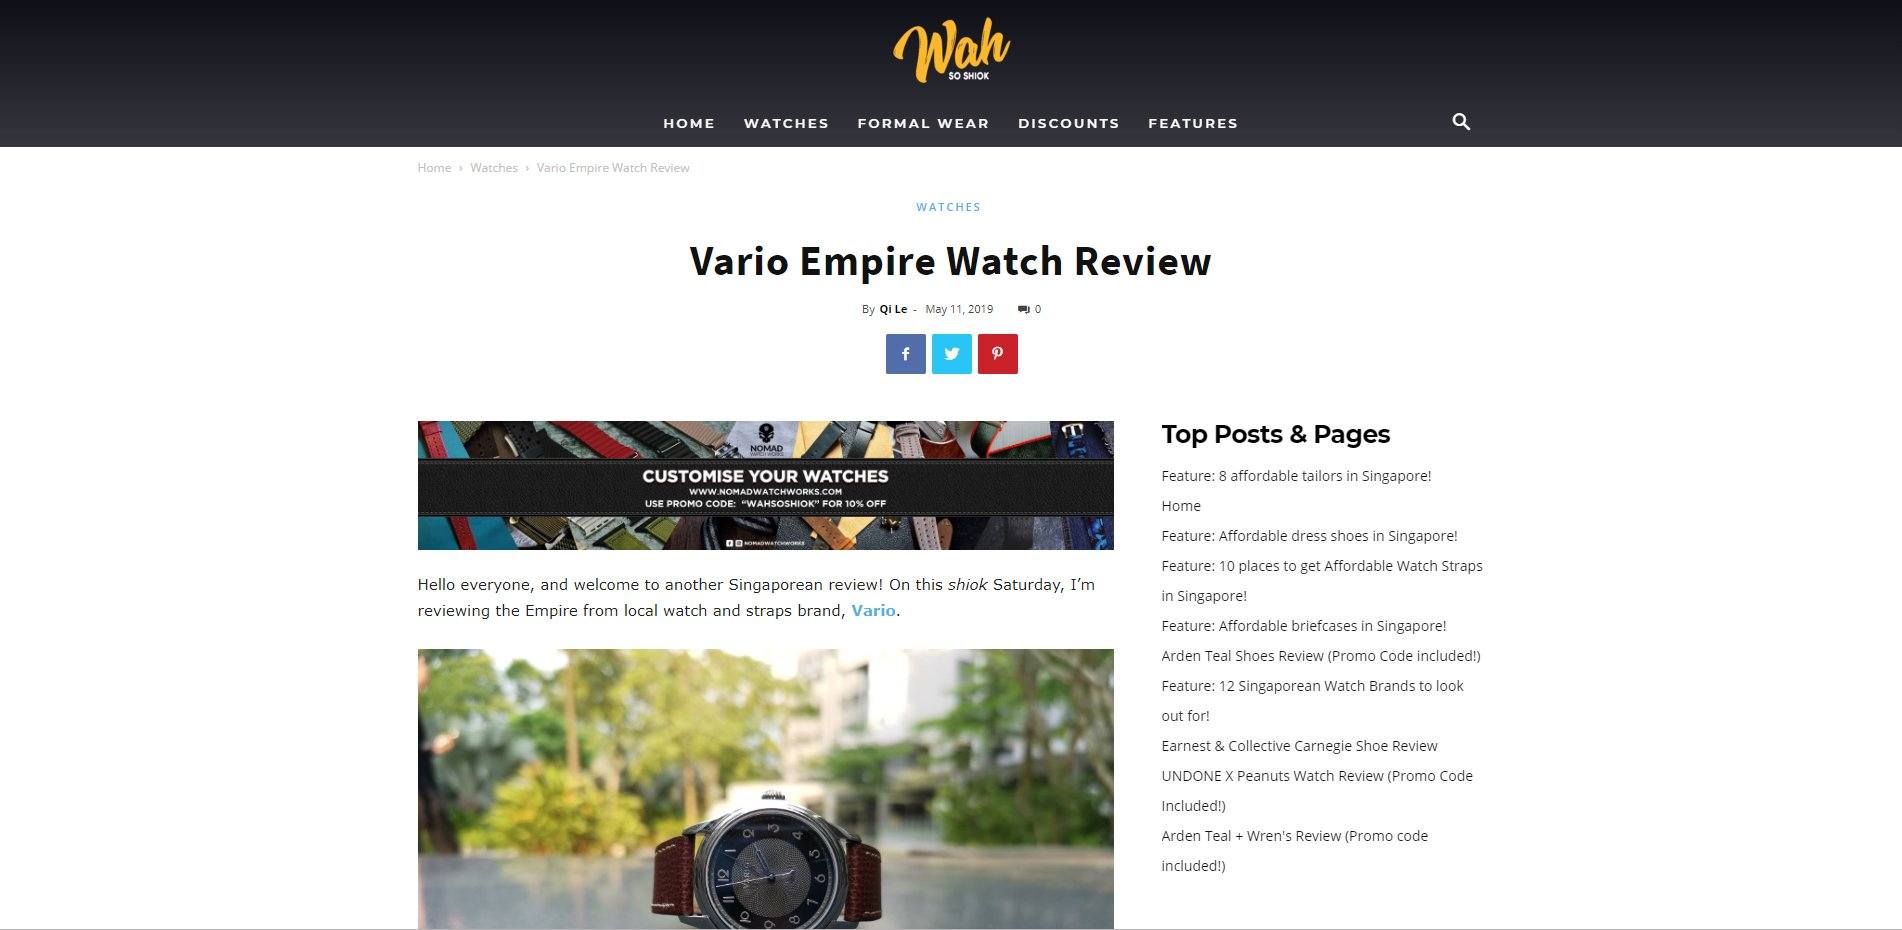 Vario Empire Watch Review by Wah So Shiok